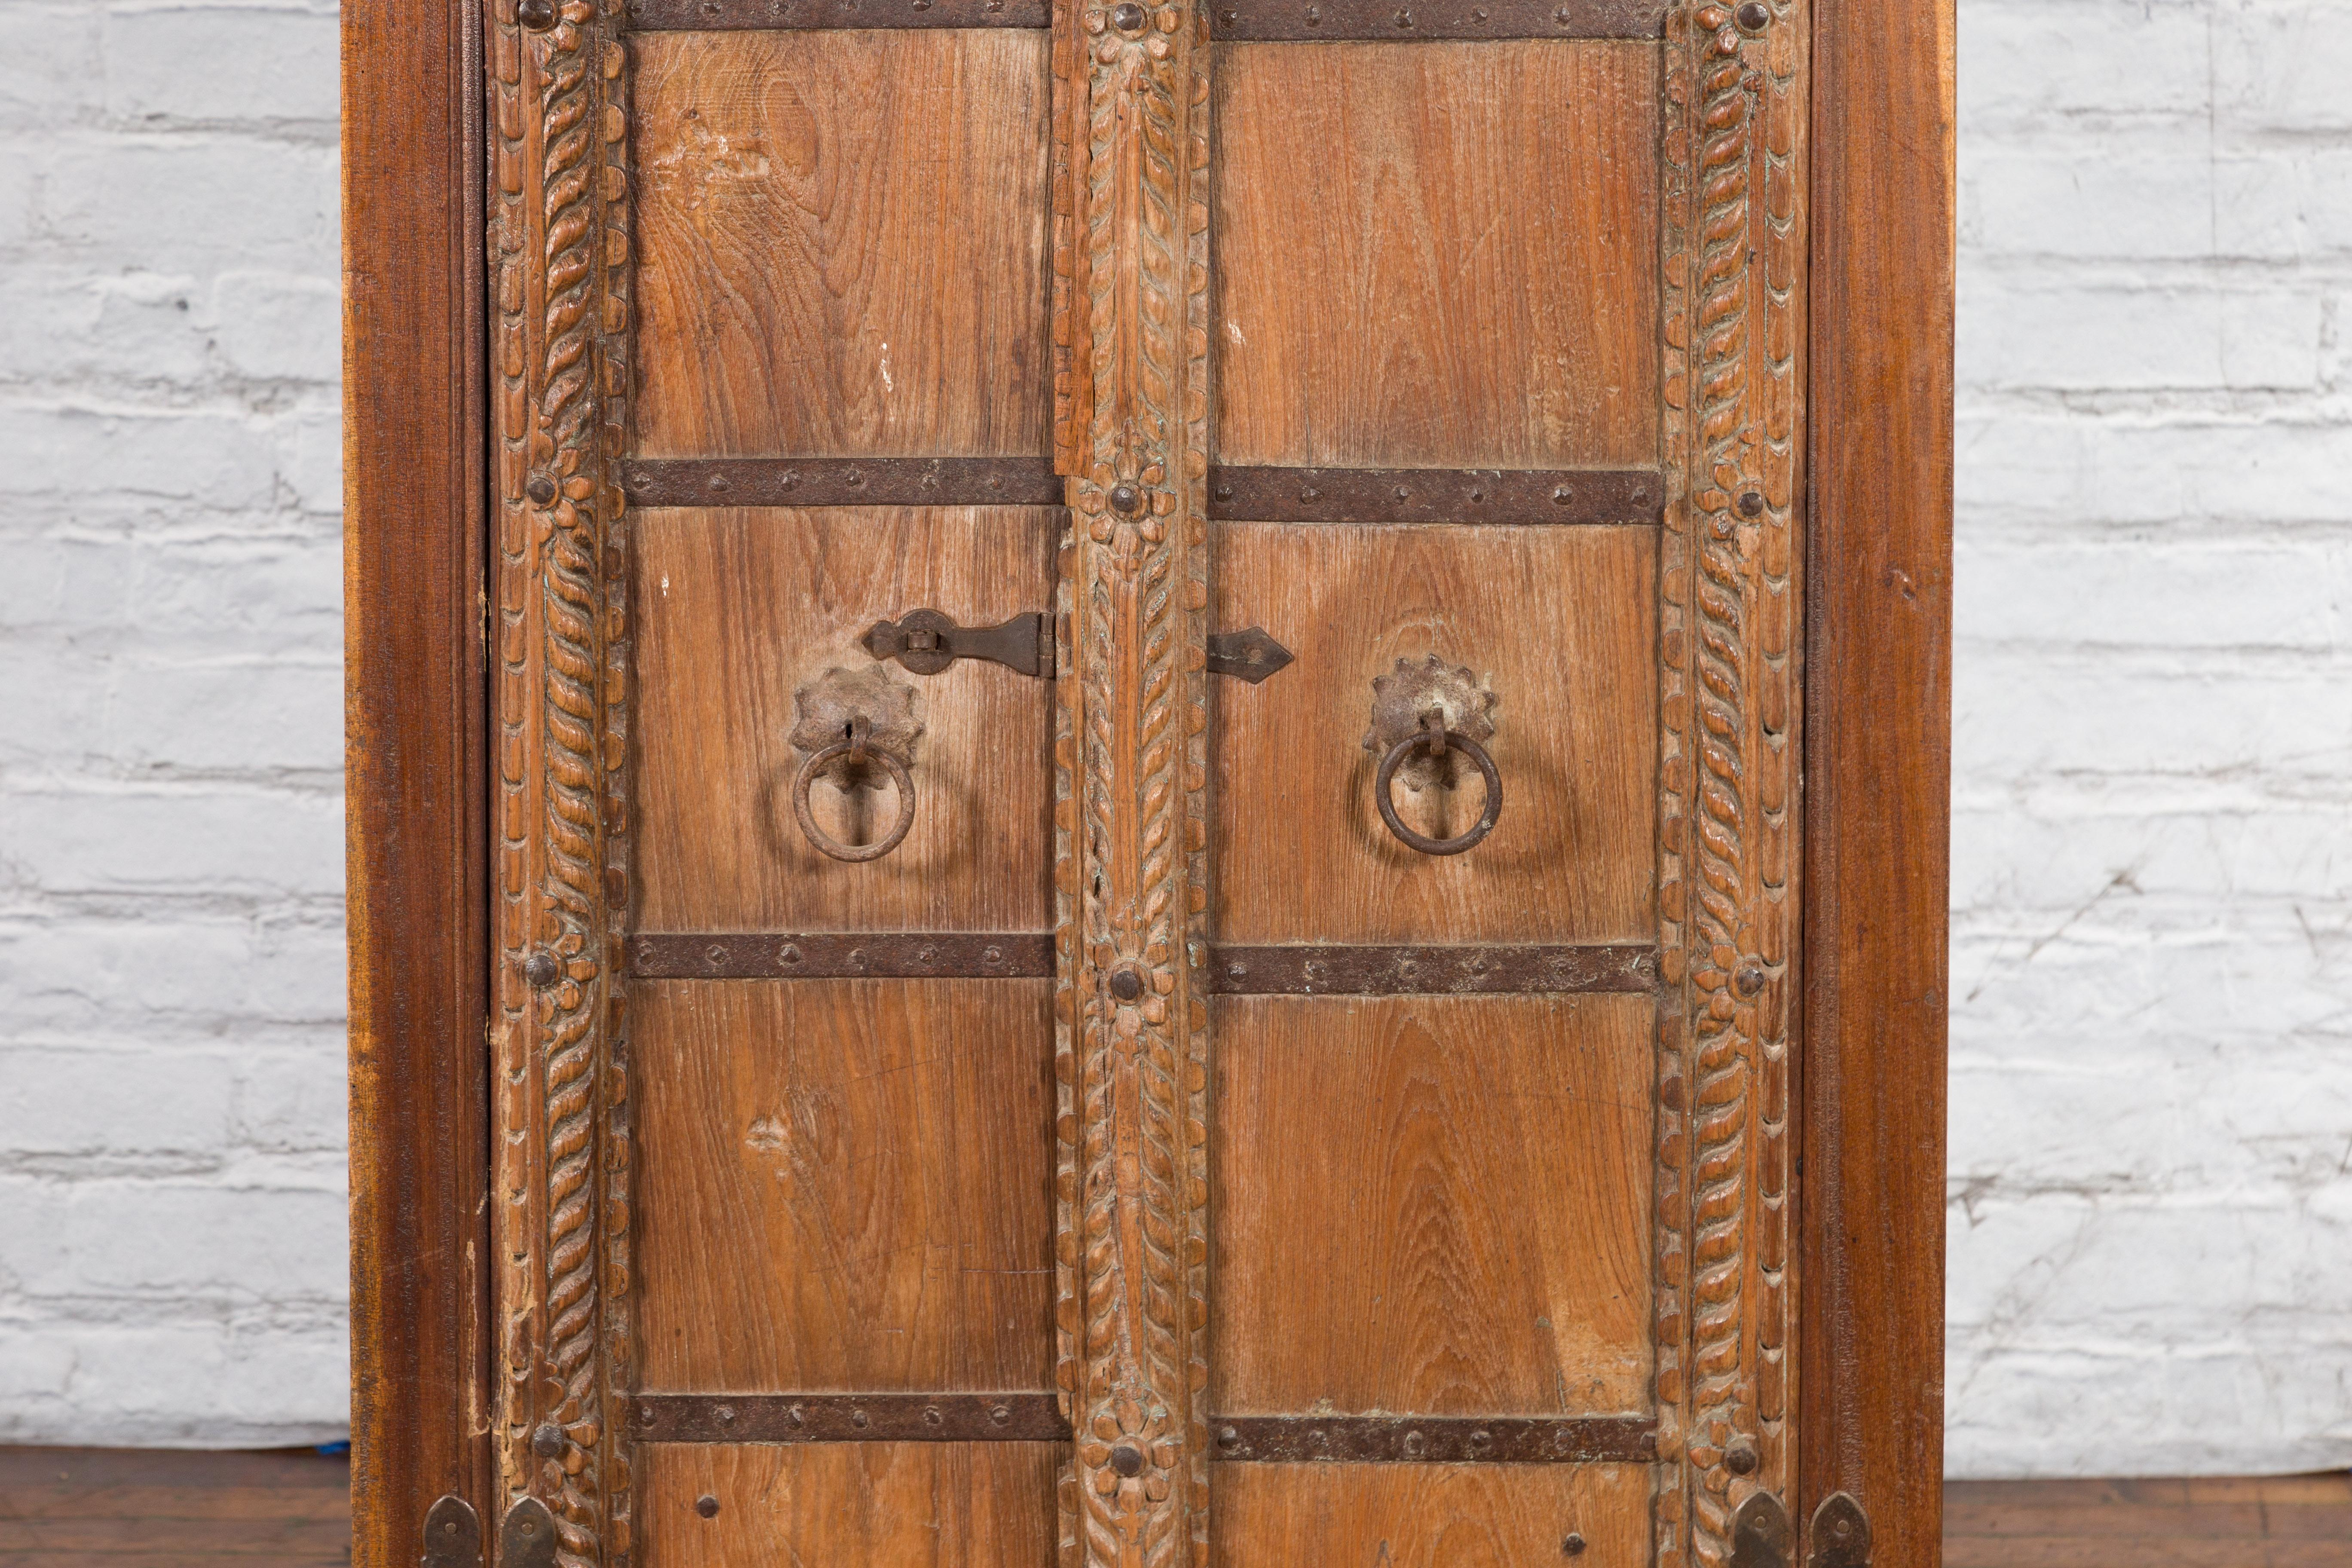 Antique 19th Century Indian Armoire with Metal Braces and Hand-Carved Décor 3